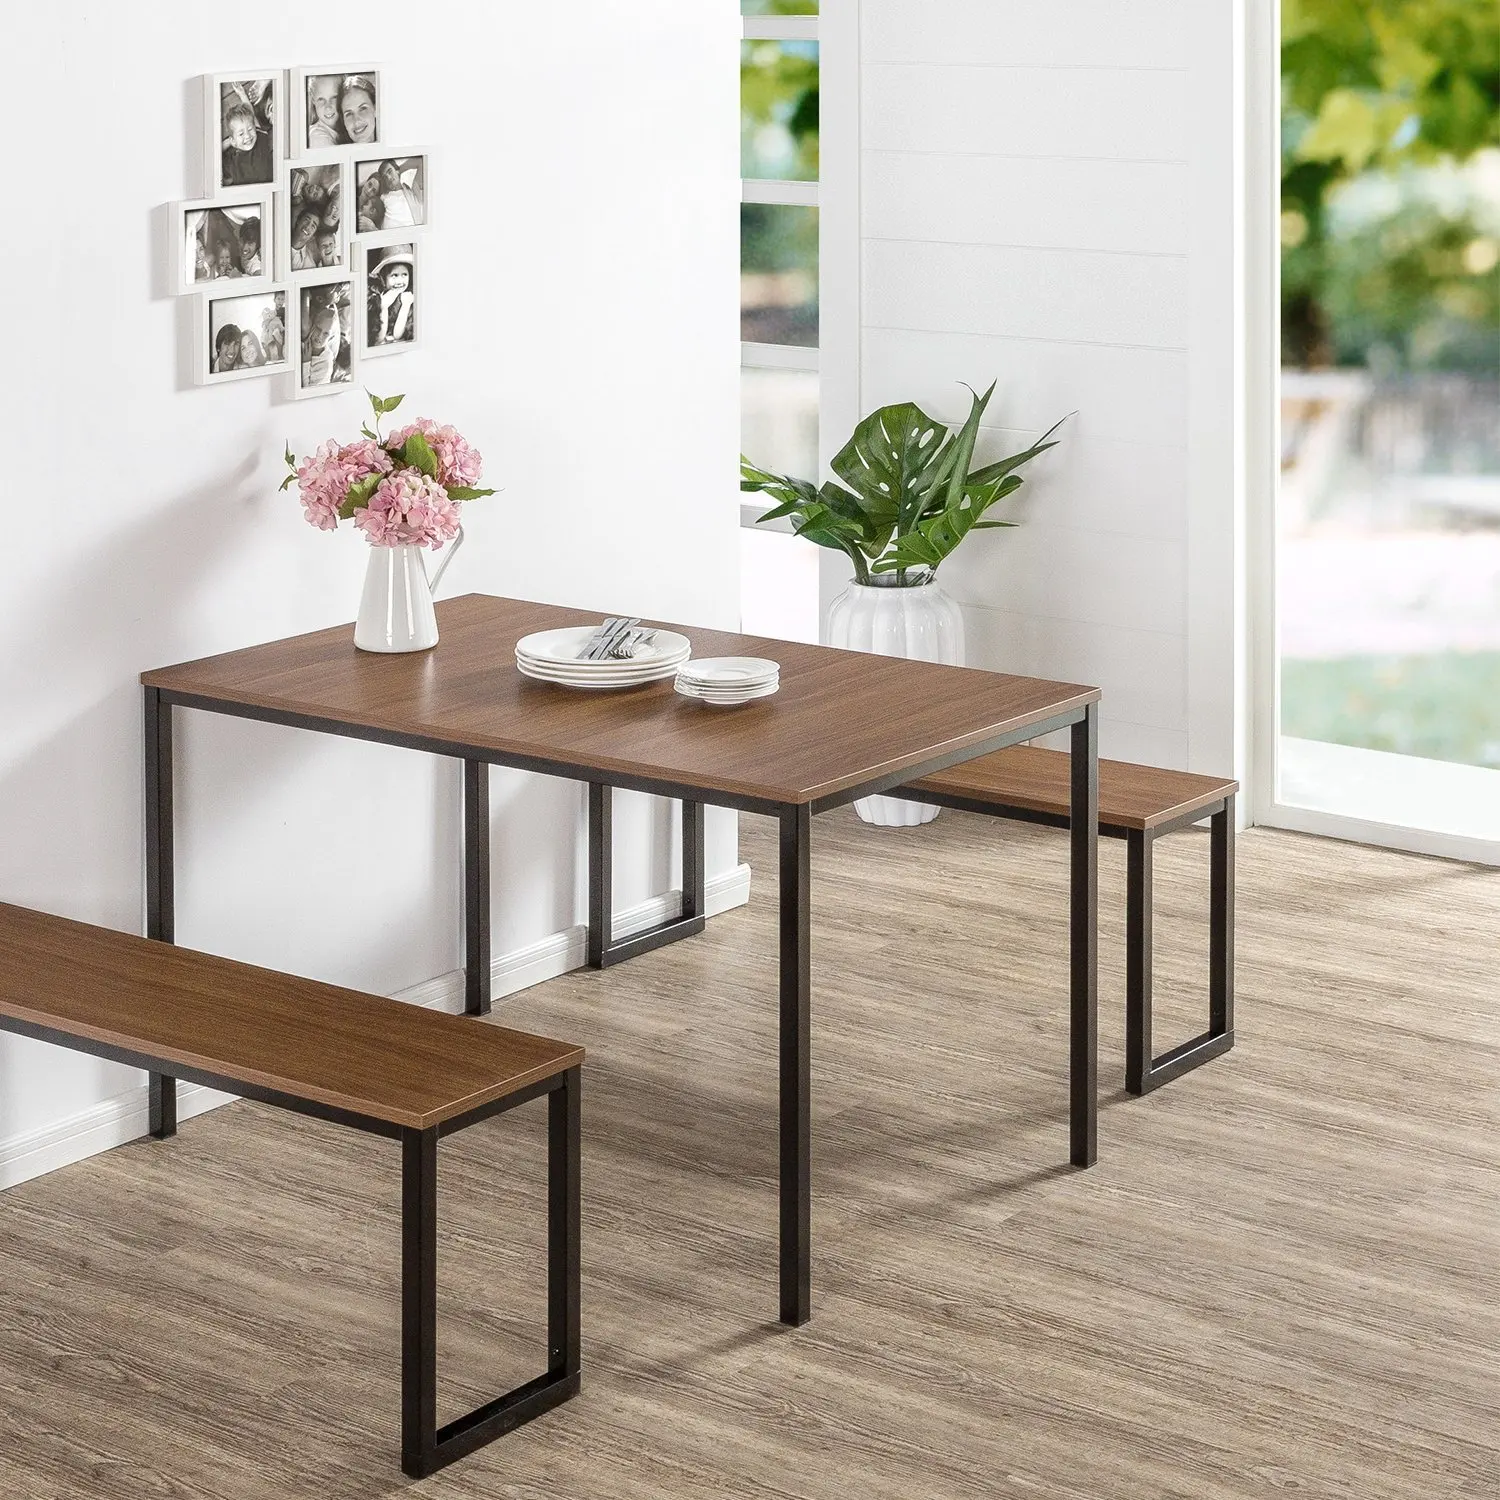 Modern Style Dining Table With Two Benches Set Wood Top Metal Leg - Buy